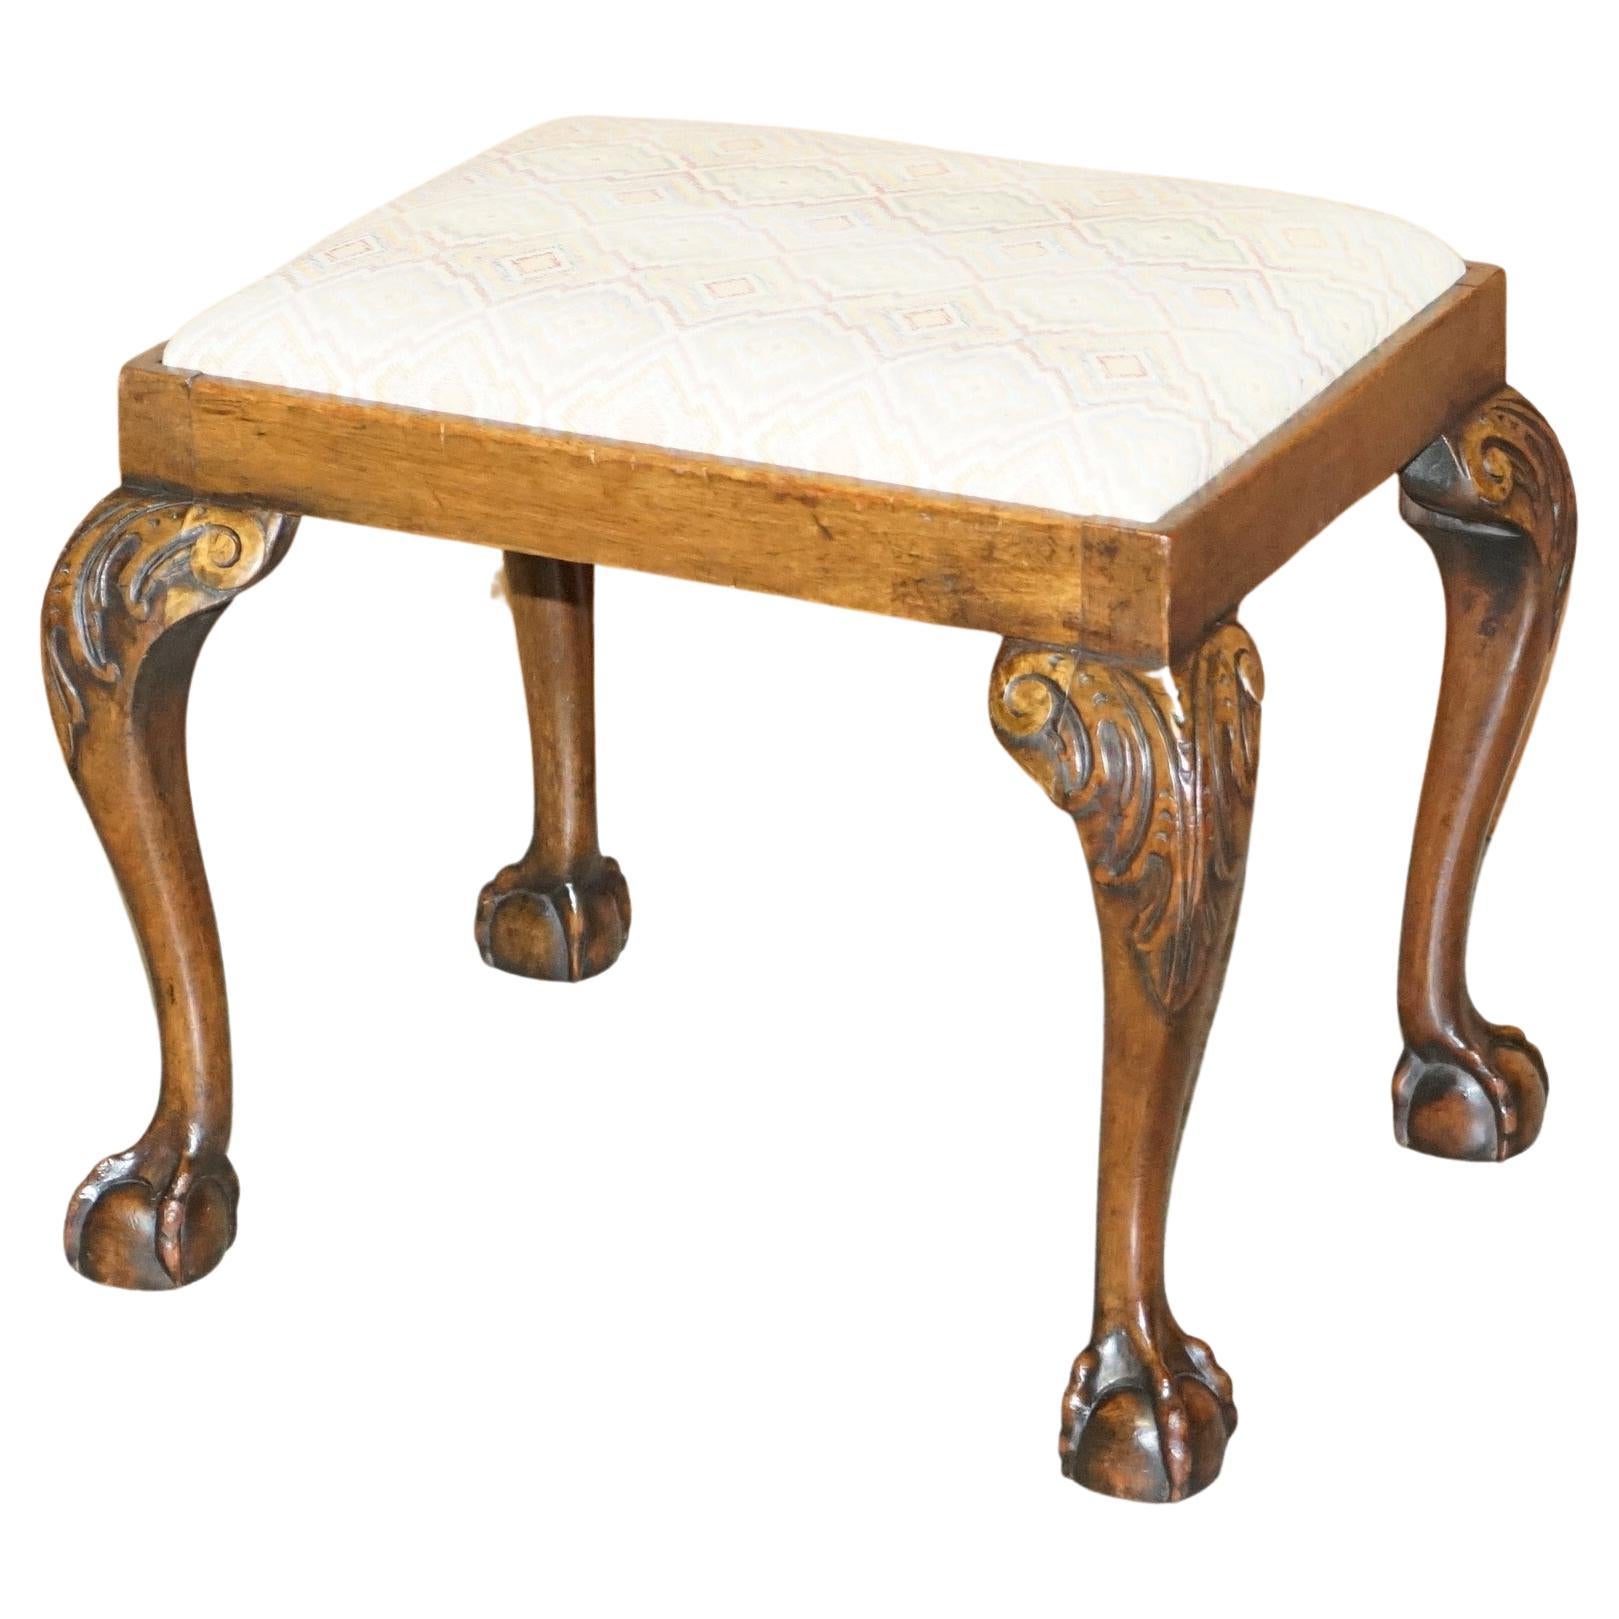 1 of 2 18th Century circa 1780 Georgian Claw & Ball Carved Walnut Stools For Sale